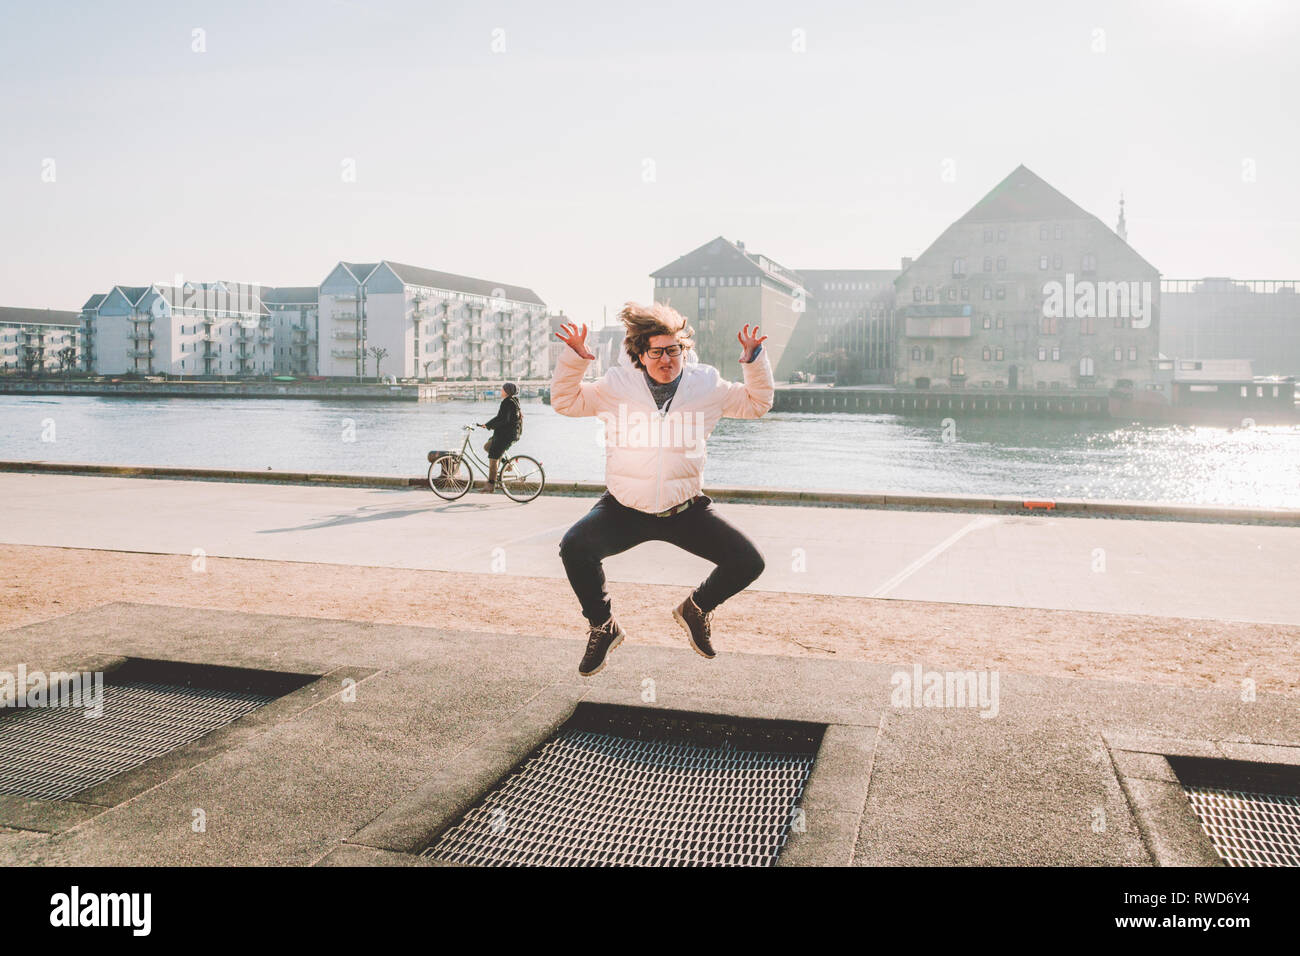 adult person rejoices like child. Playground trampoline in ground, children  trampoline, springs throws people up fun and cool. Copenhagen River Embank  Stock Photo - Alamy